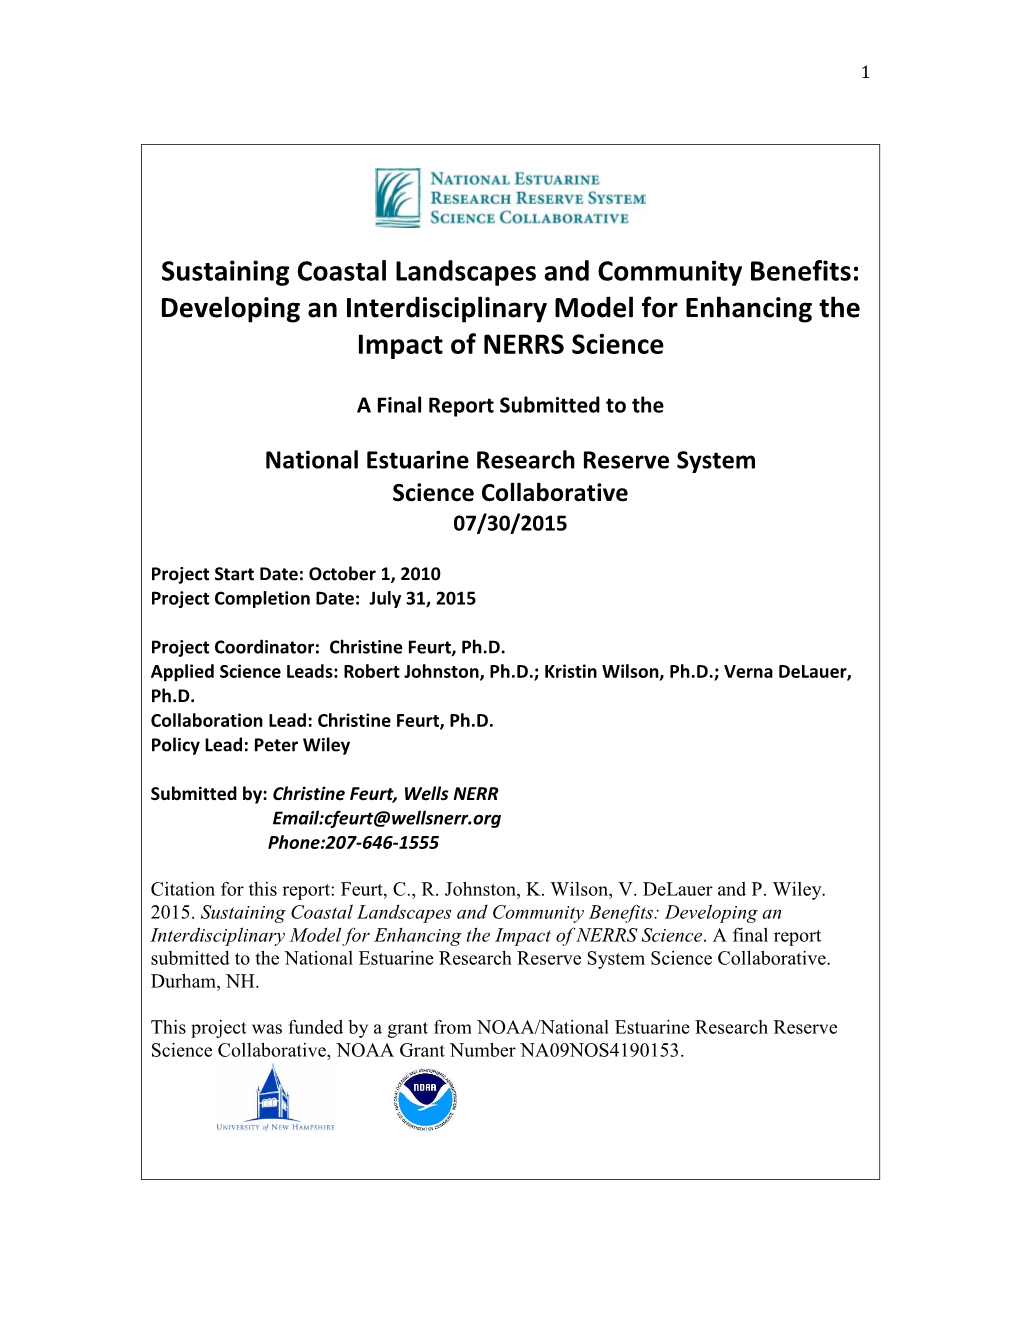 Developing an Interdisciplinary Model for Enhancing the Impact of NERRS Science